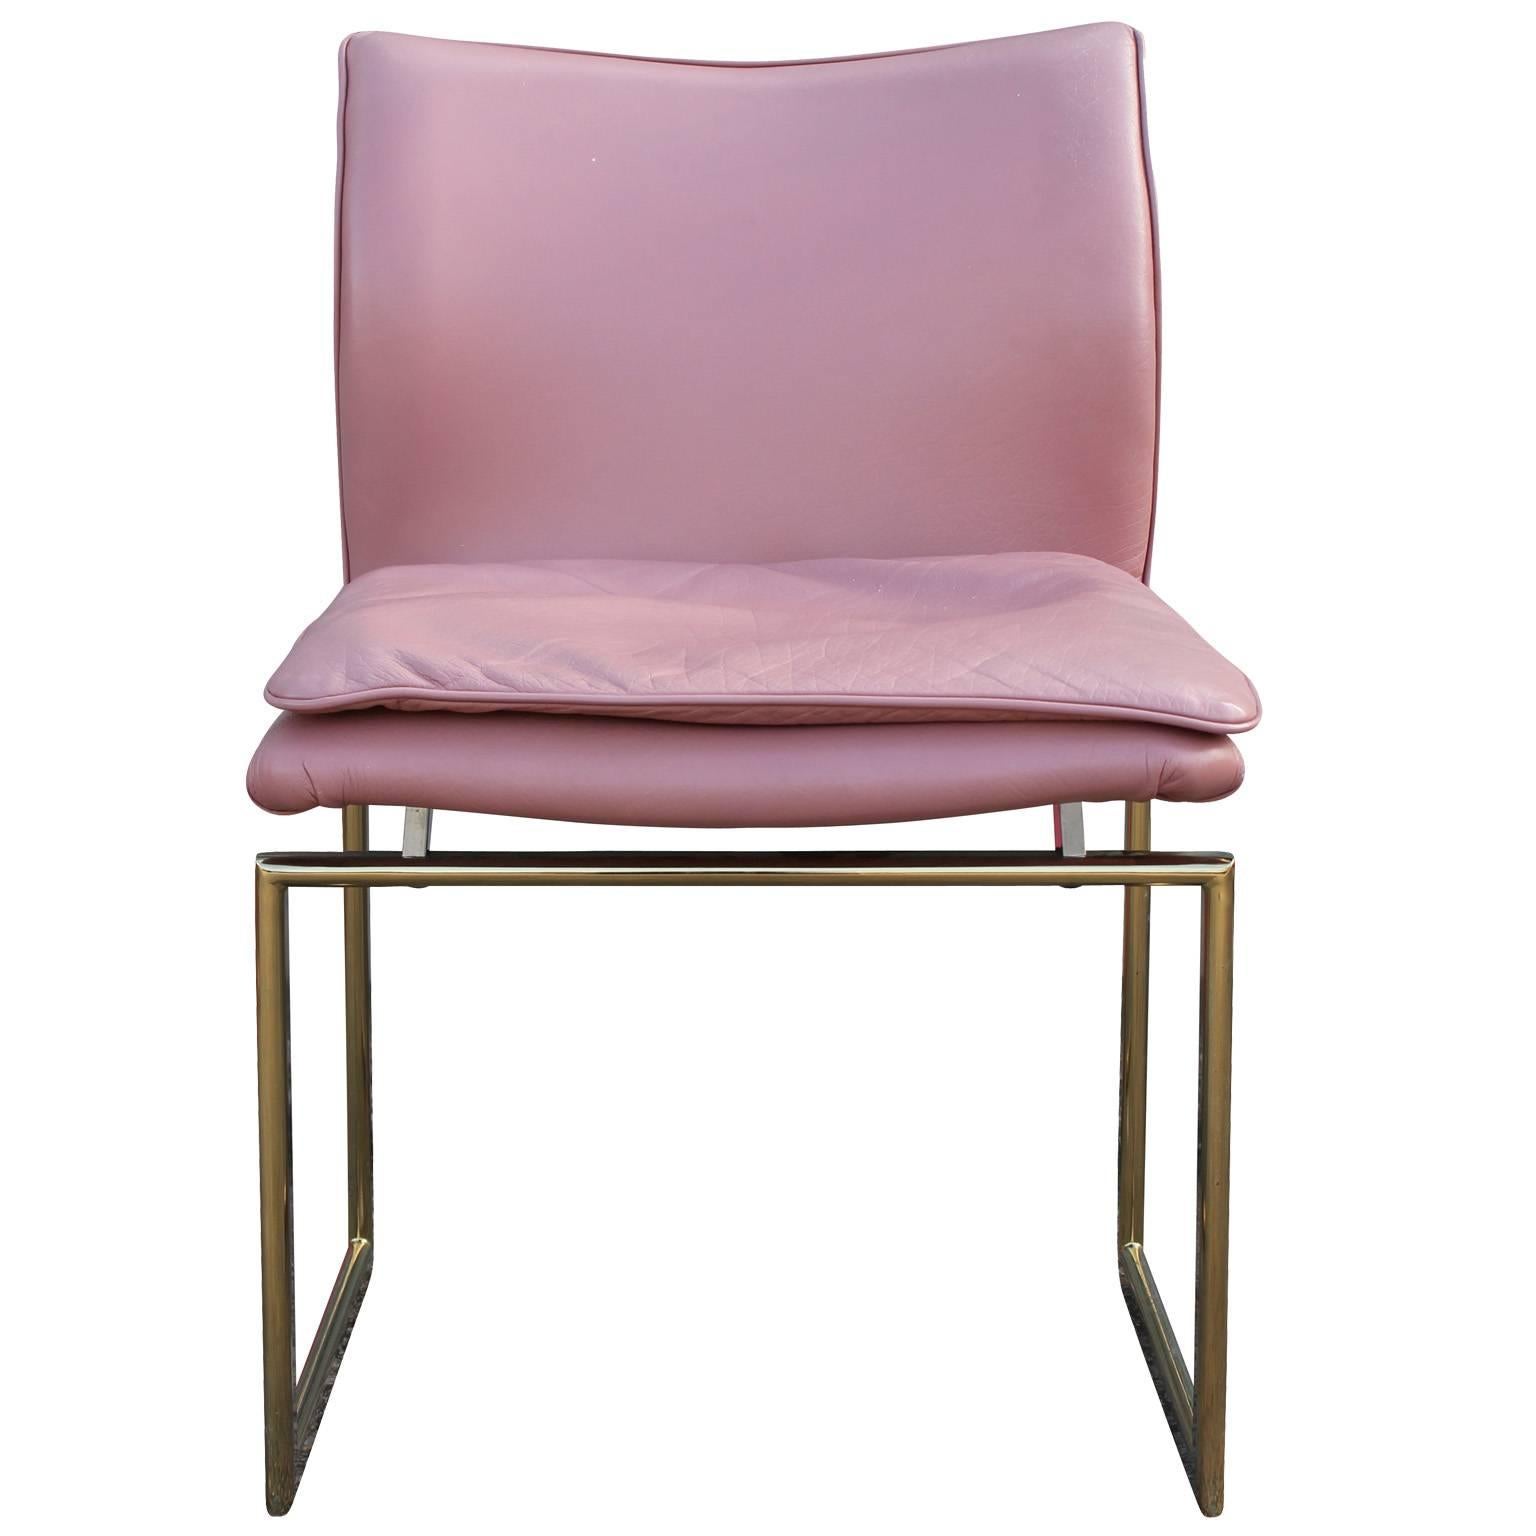 Incredible set of Pieff and Co. dining chairs. Architectural brass frames nicely contracts the ergonomic curves of the seats. Seats are upholstered in a mauve pink leather. Leather is in good shape with some minor sun fading. Chairs are marked 